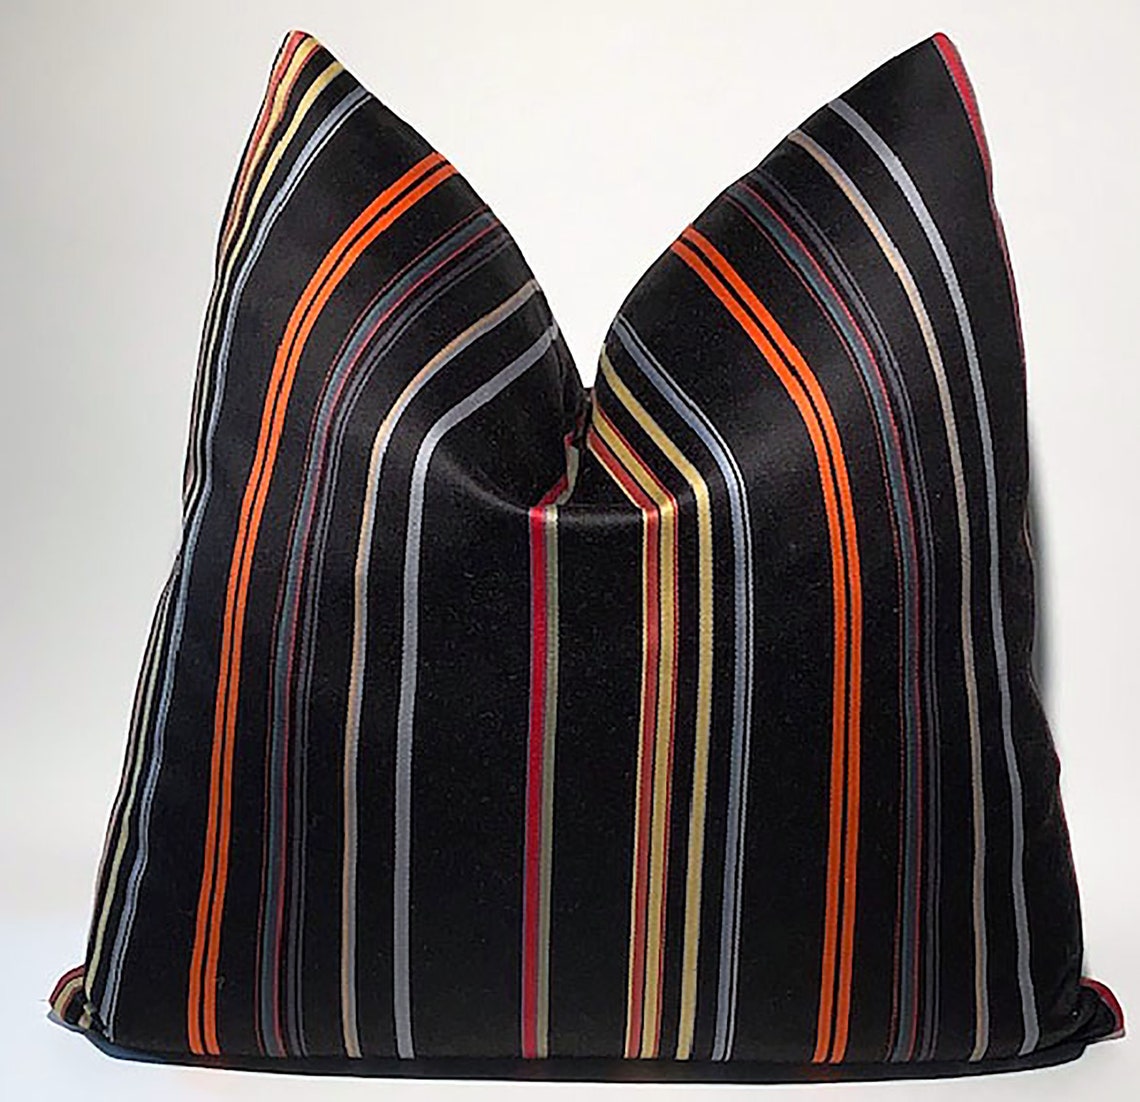 Pillow in Striped Designer Paul Smith Fabric Black With Bold Stripes ...